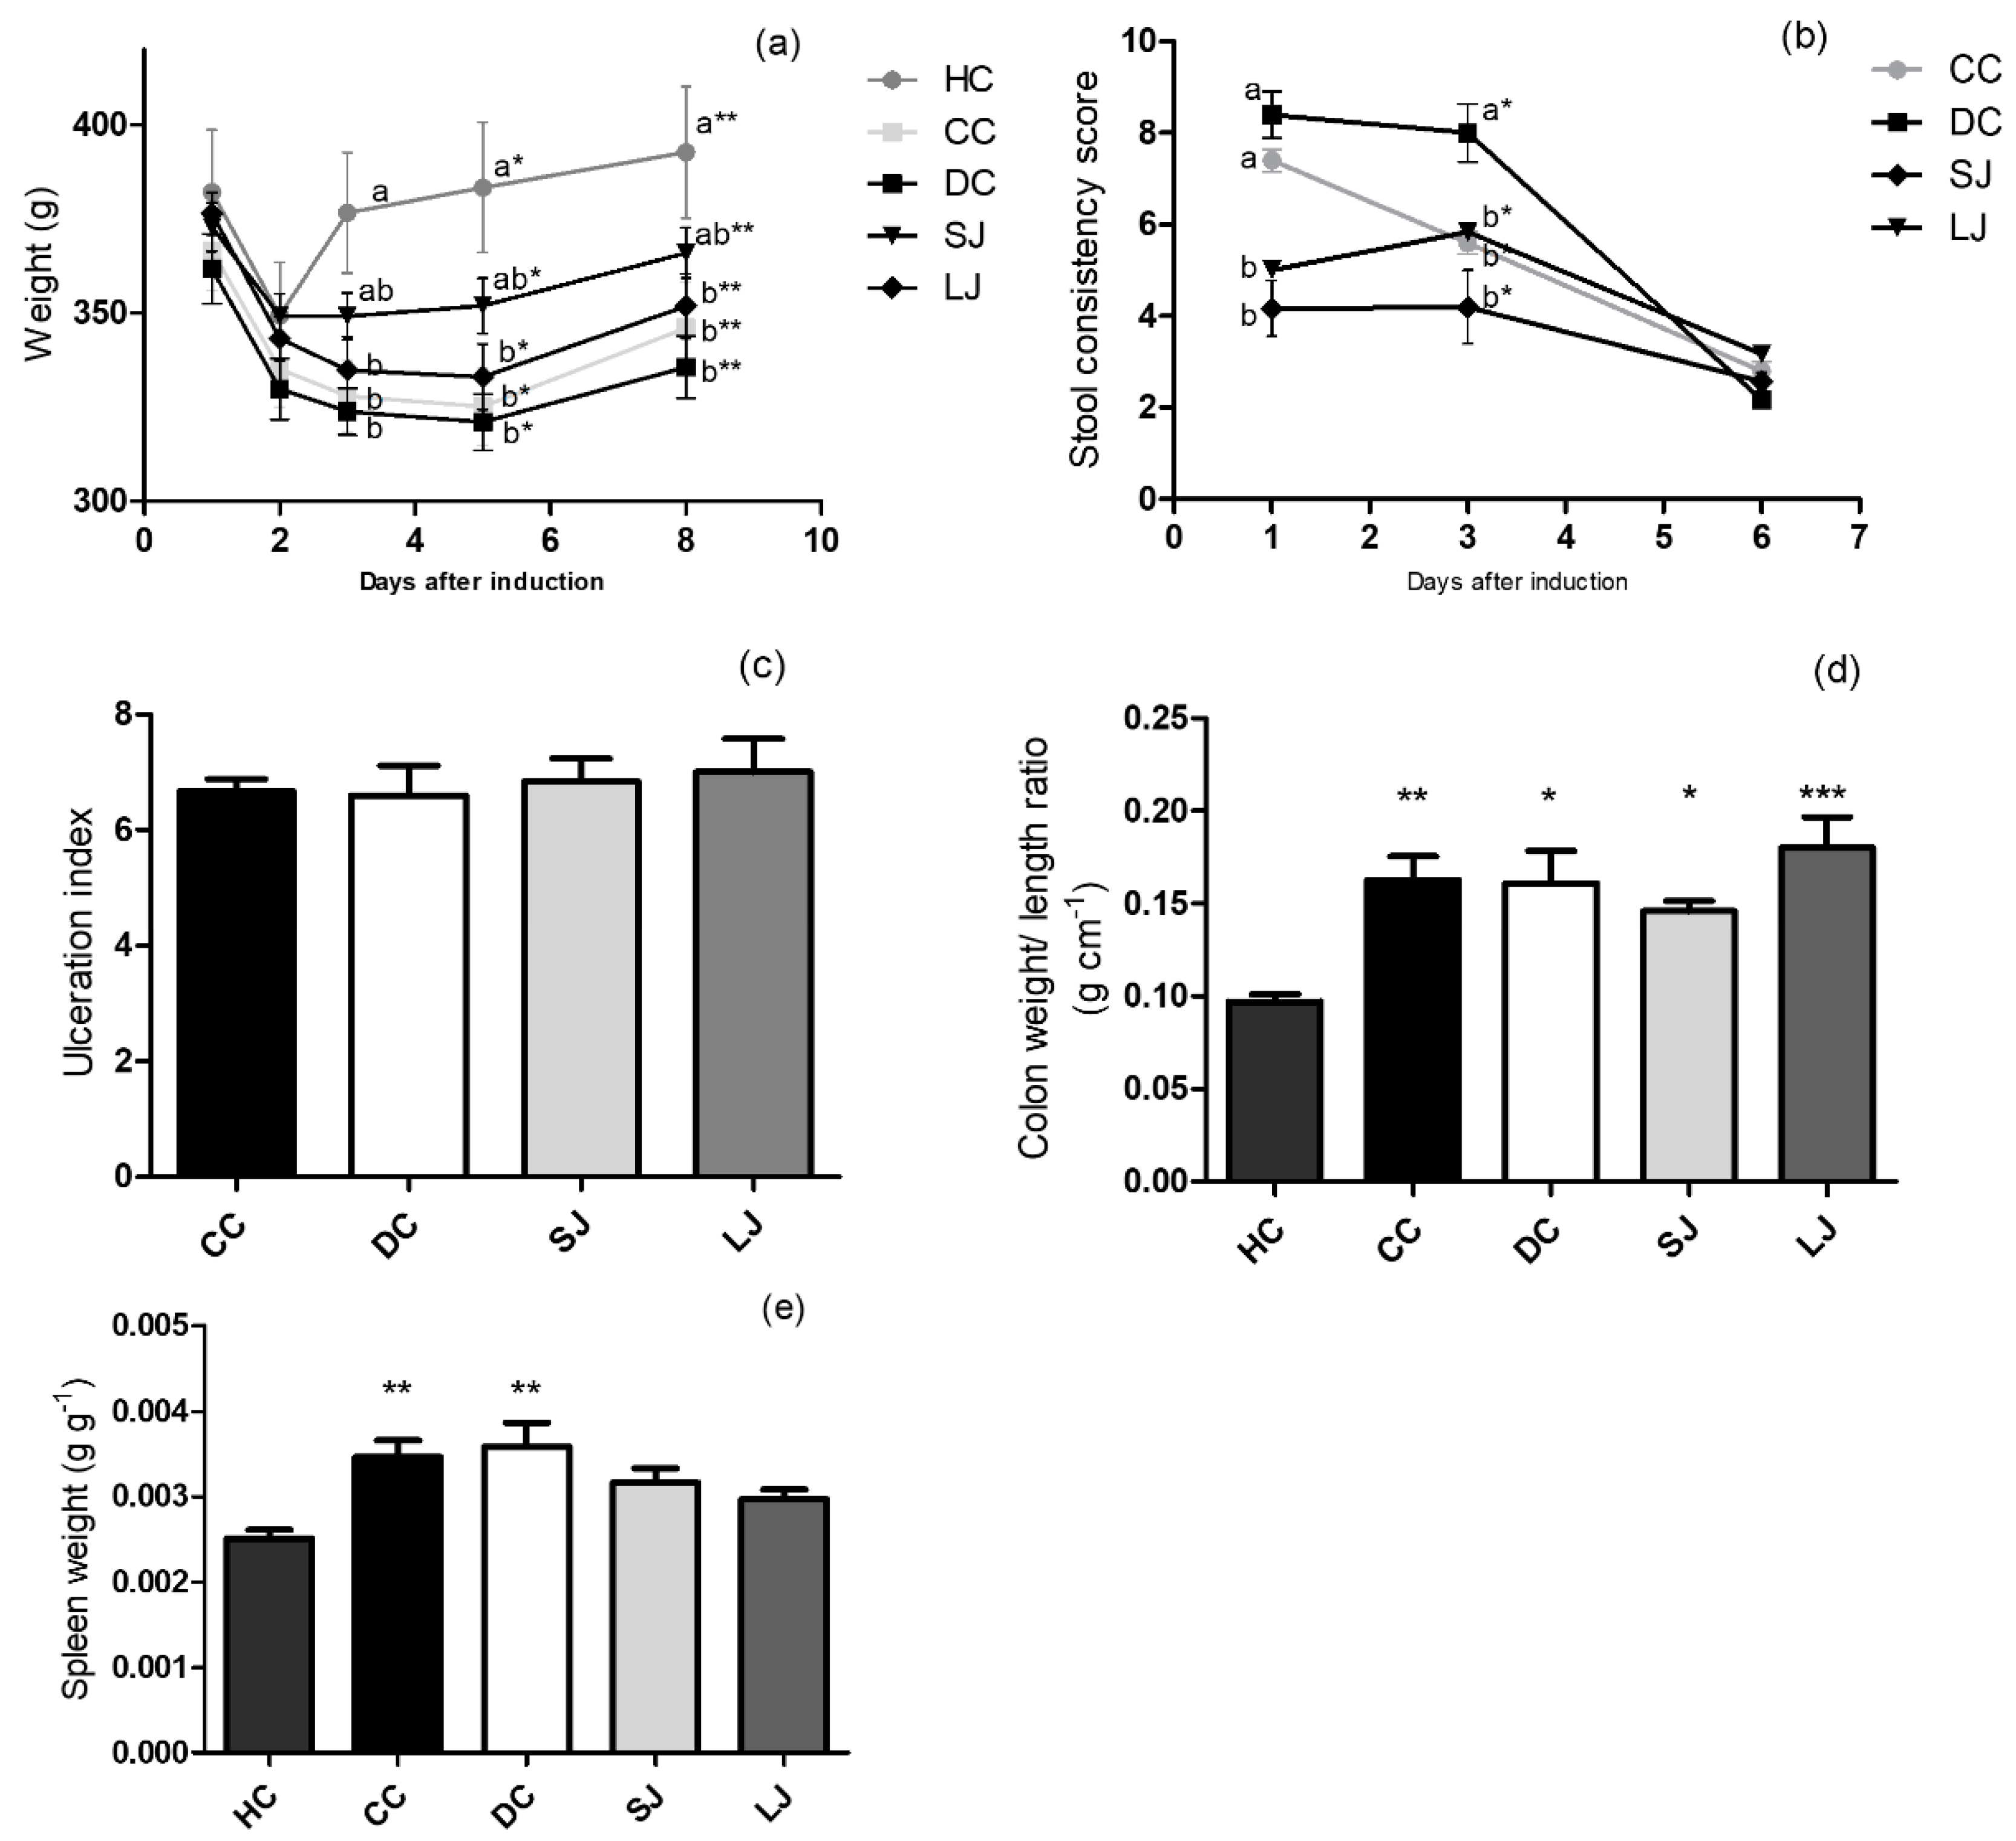 Nutrients Free Full Text Aqueous Extract Of Brazilian Berry Myrciaria Jaboticaba Peel Improves Inflammatory Parameters And Modulates Lactobacillus And Bifidobacterium In Rats With Induced Colitis Html